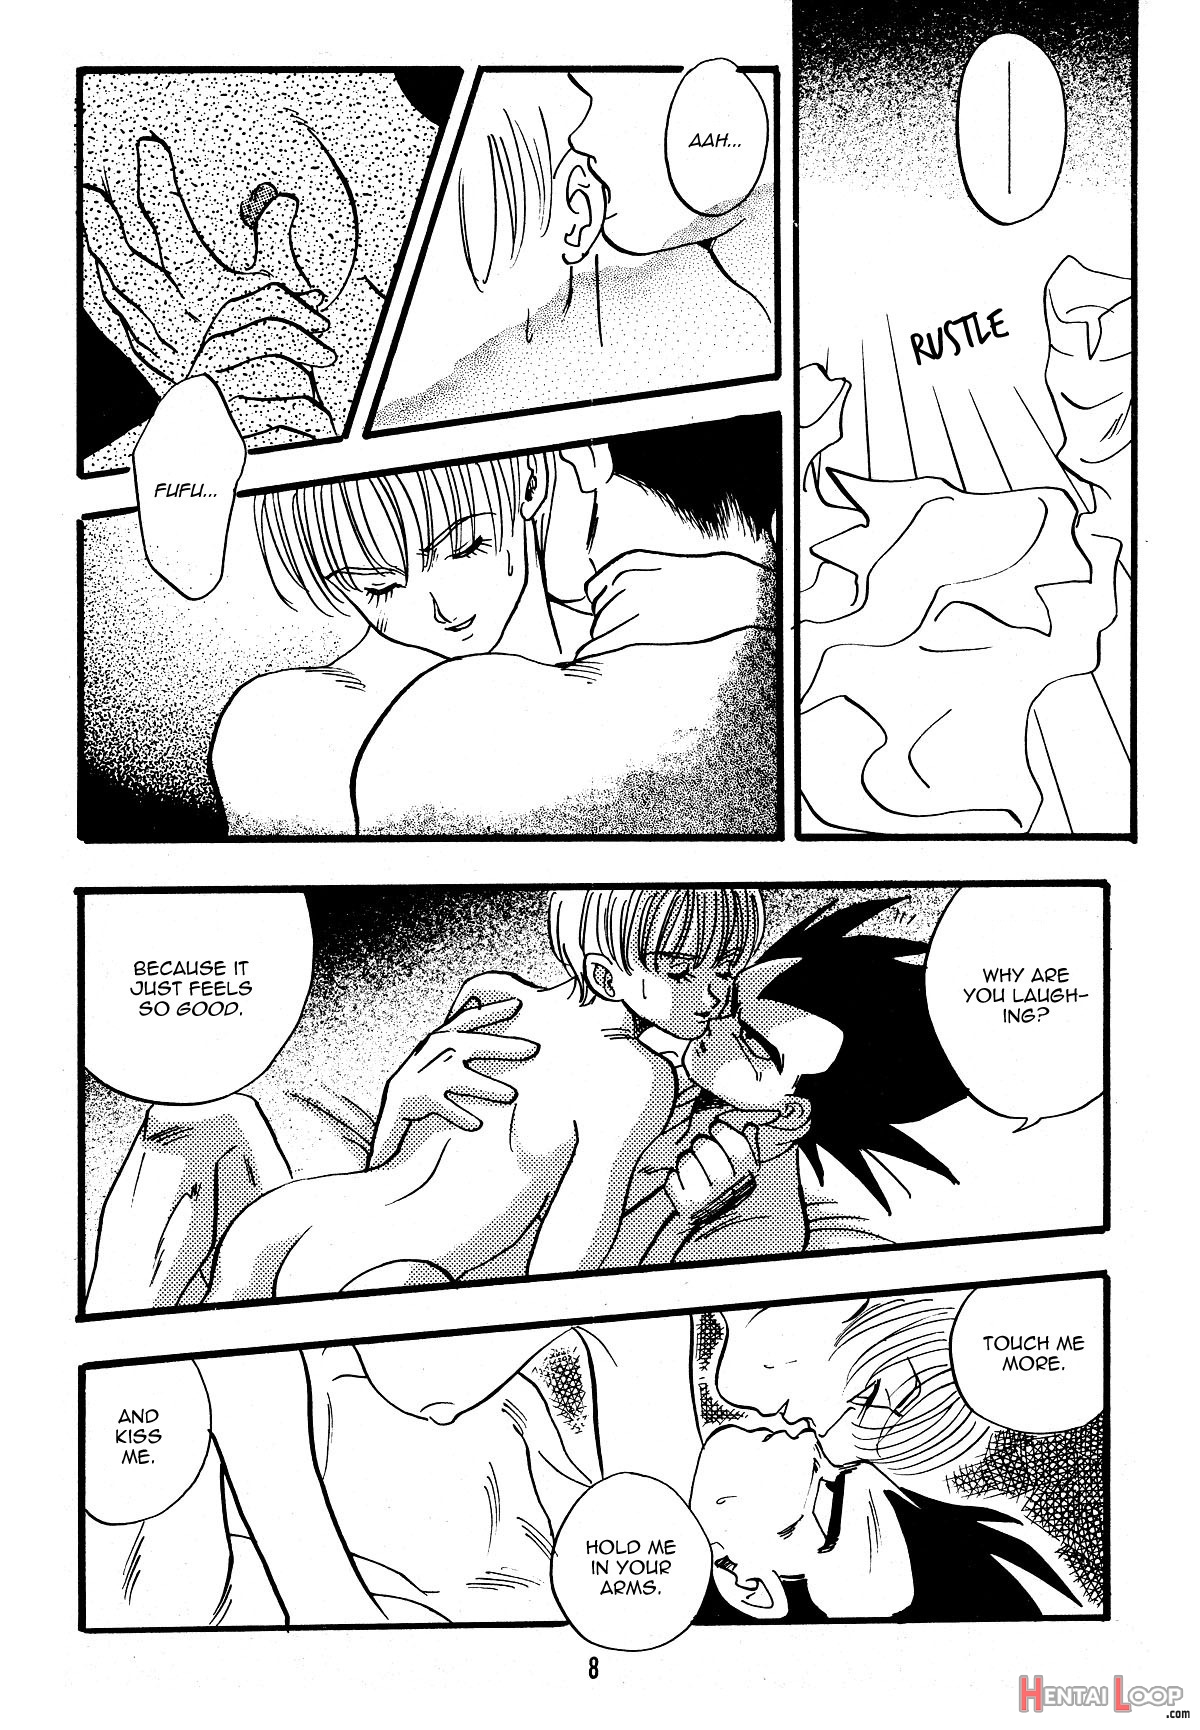 Erotic Flame page 9